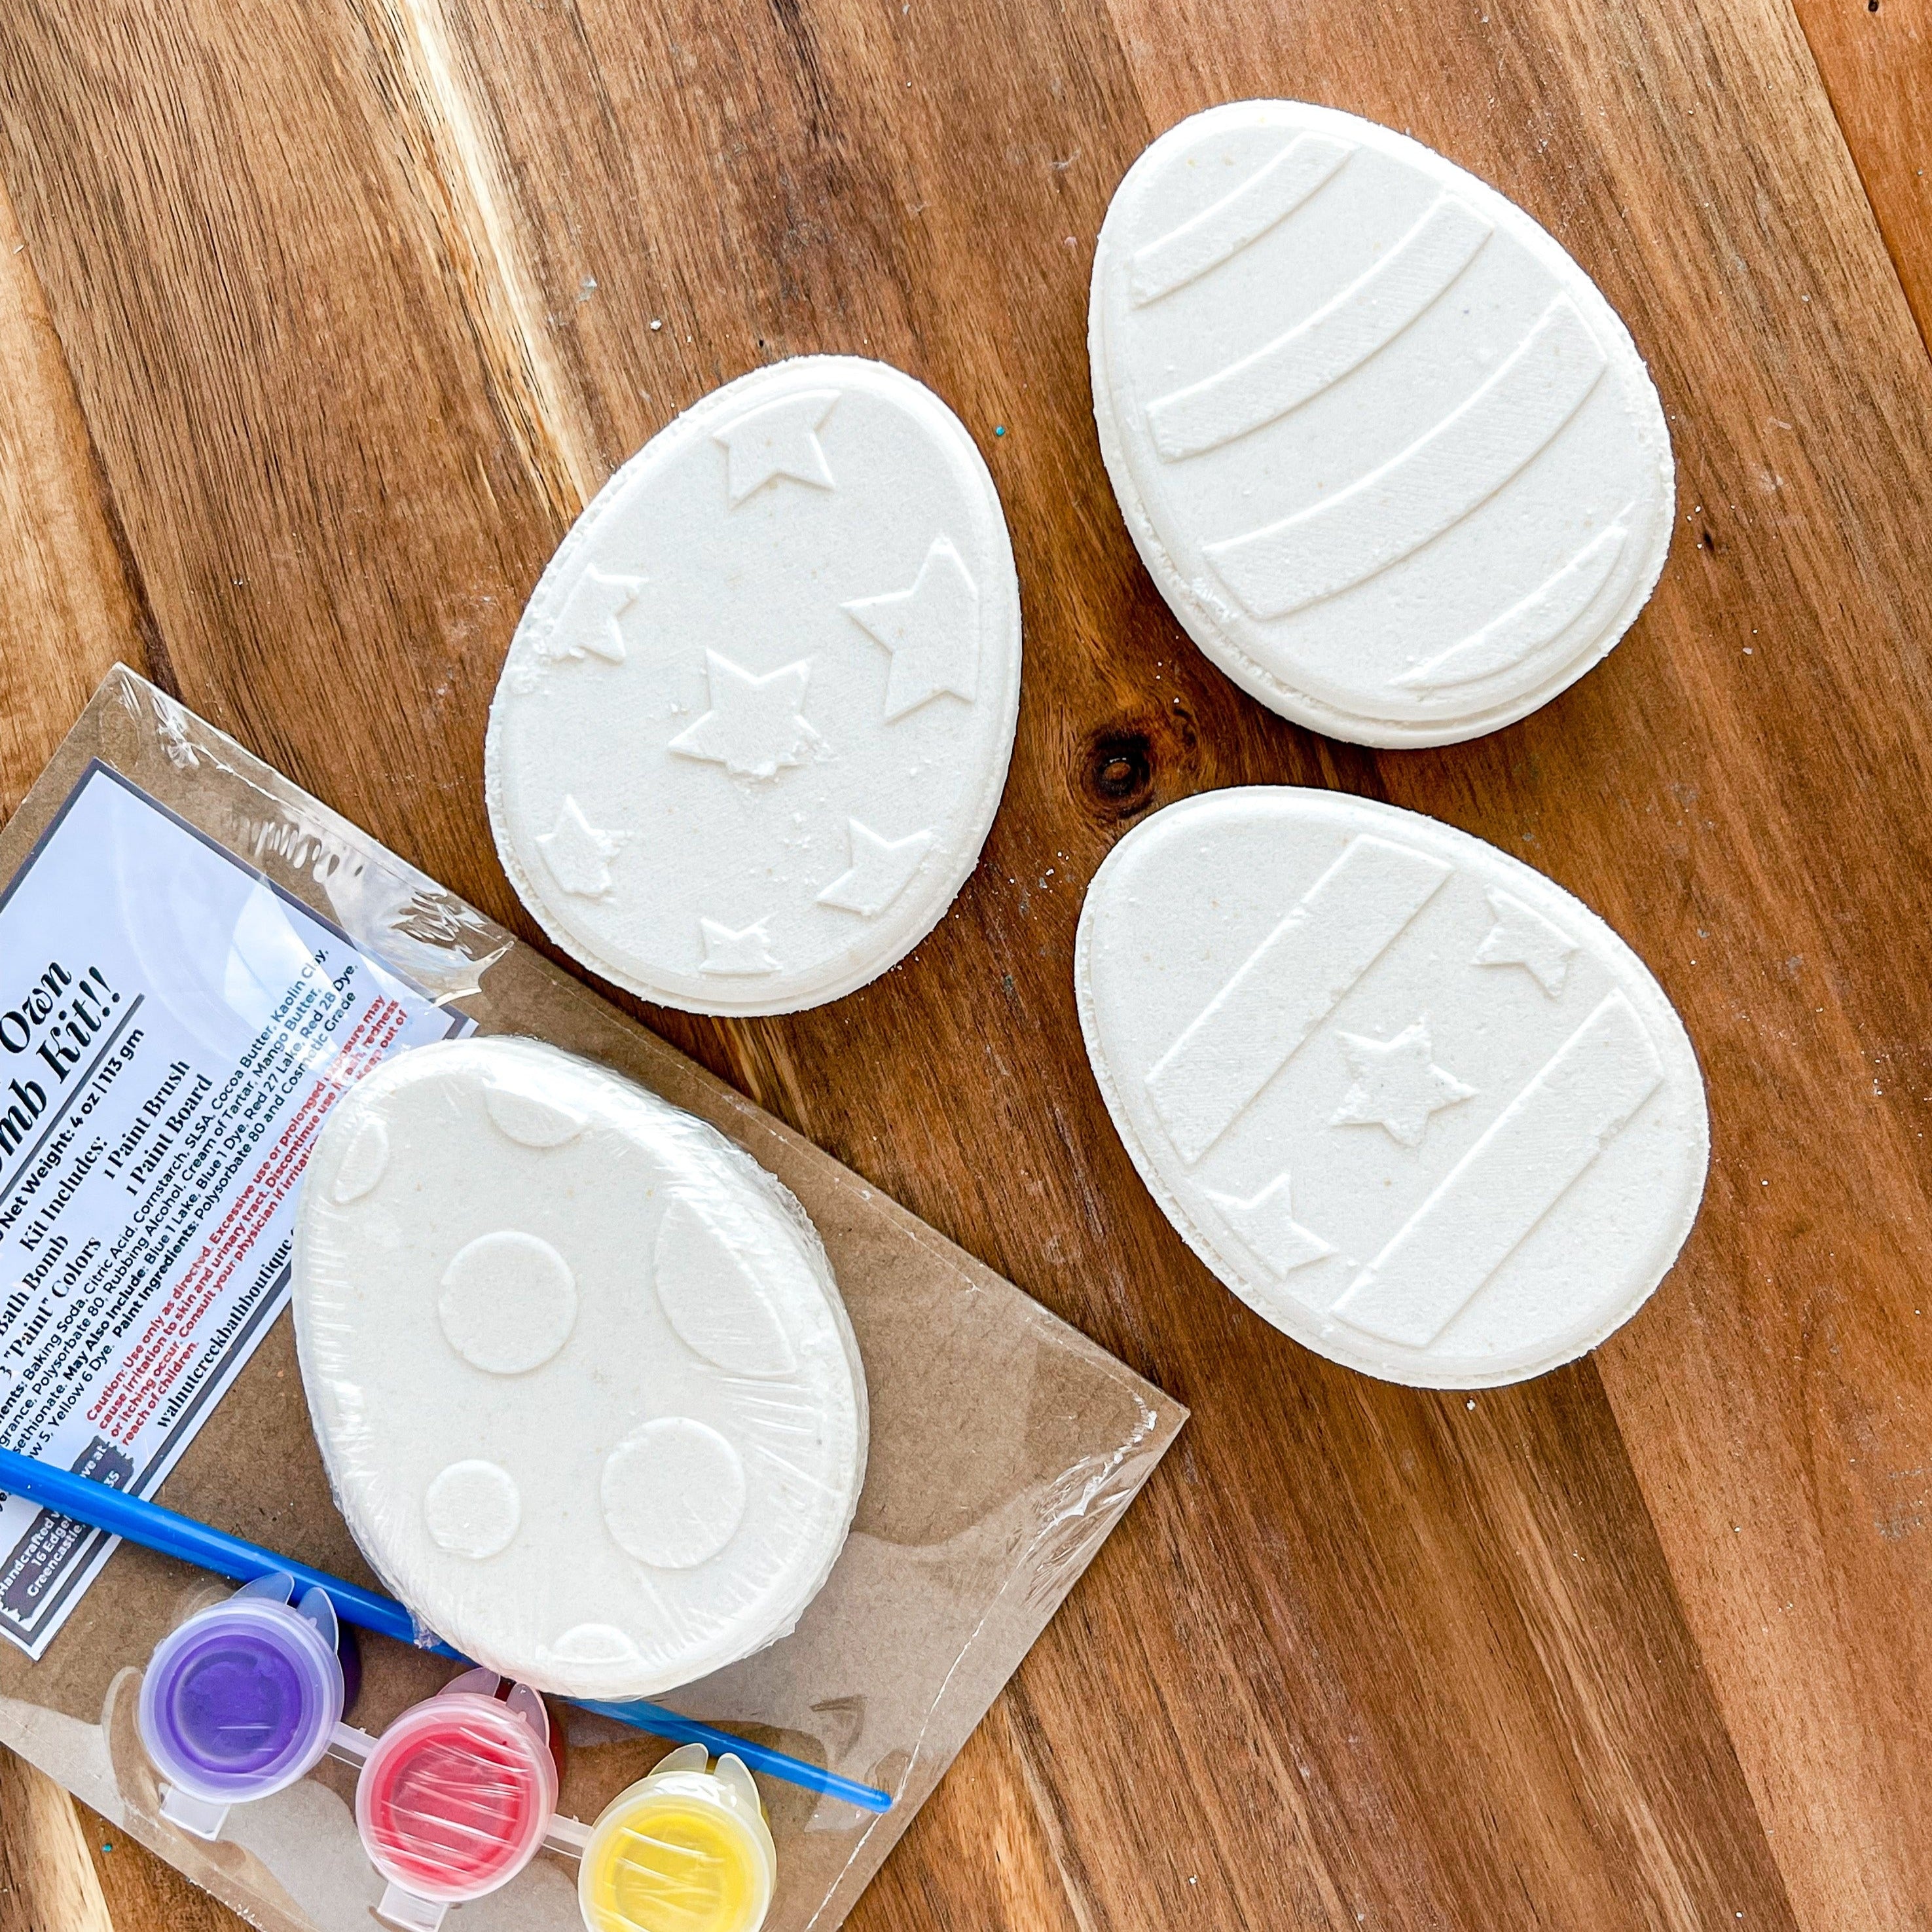 4 white easter egg bath bombs next to the kit with the paint brush and paint